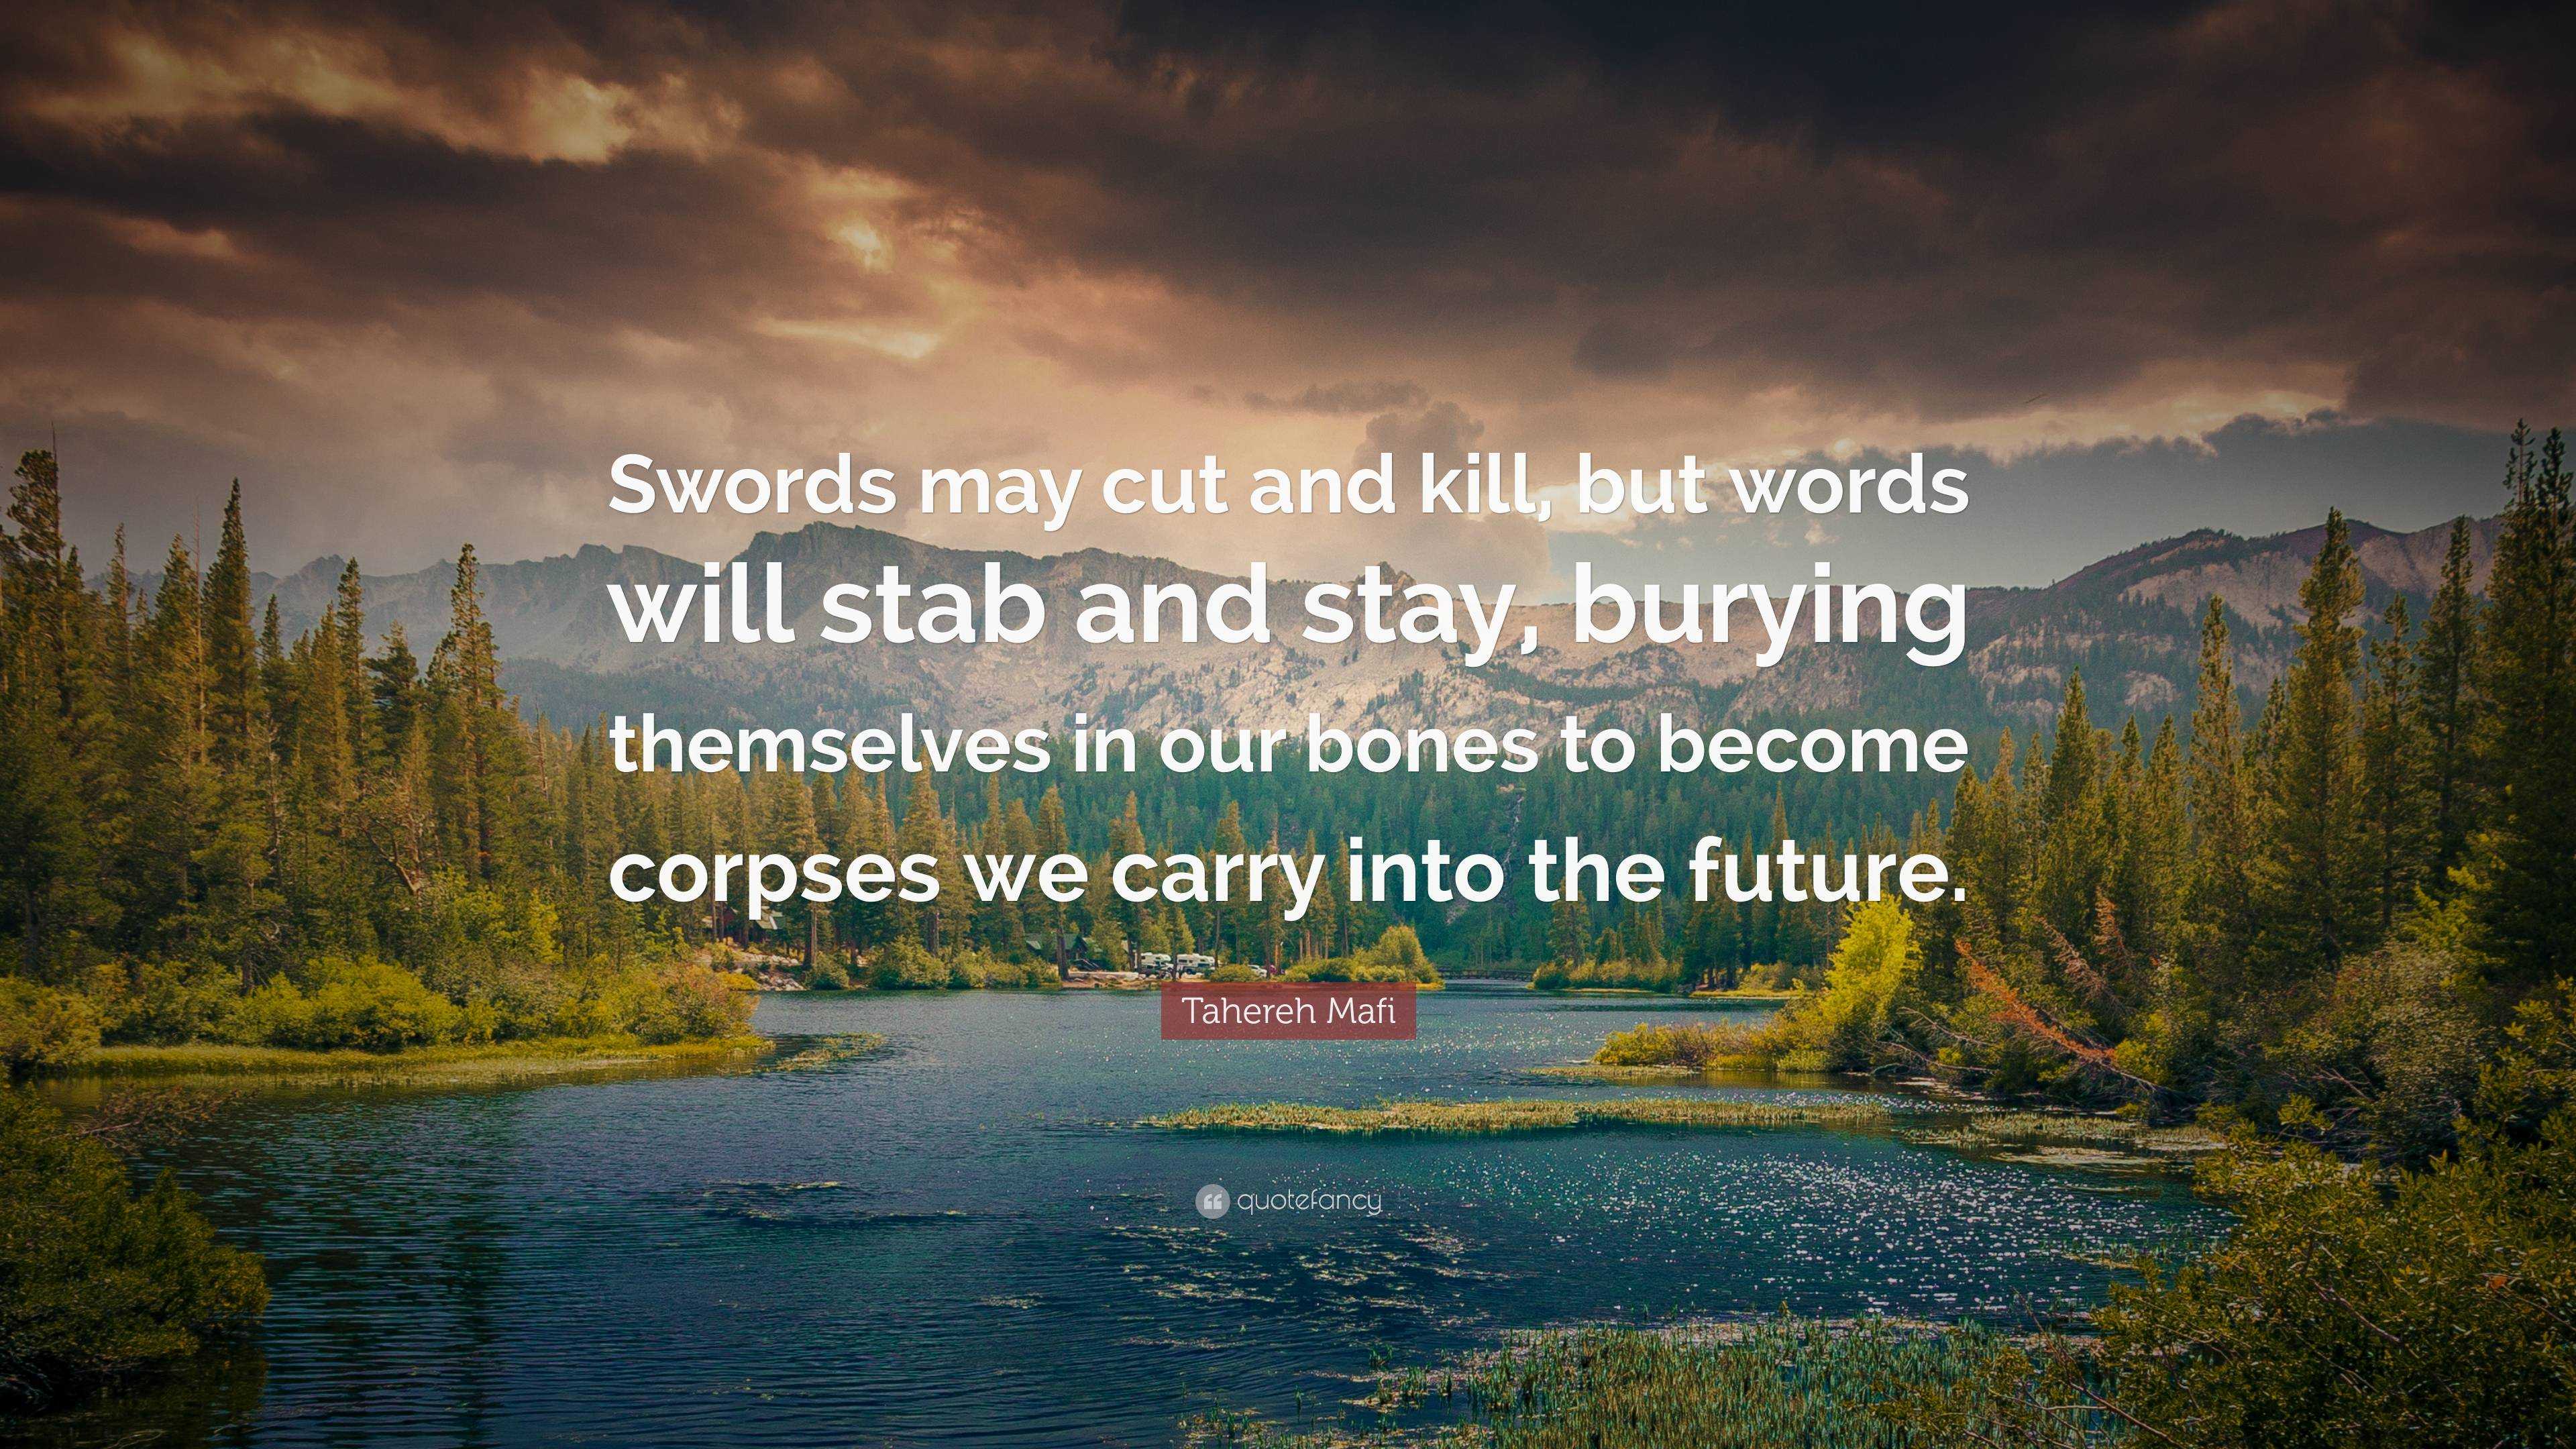 Tahereh Mafi Quote: “Swords may cut and kill, but words will stab and ...